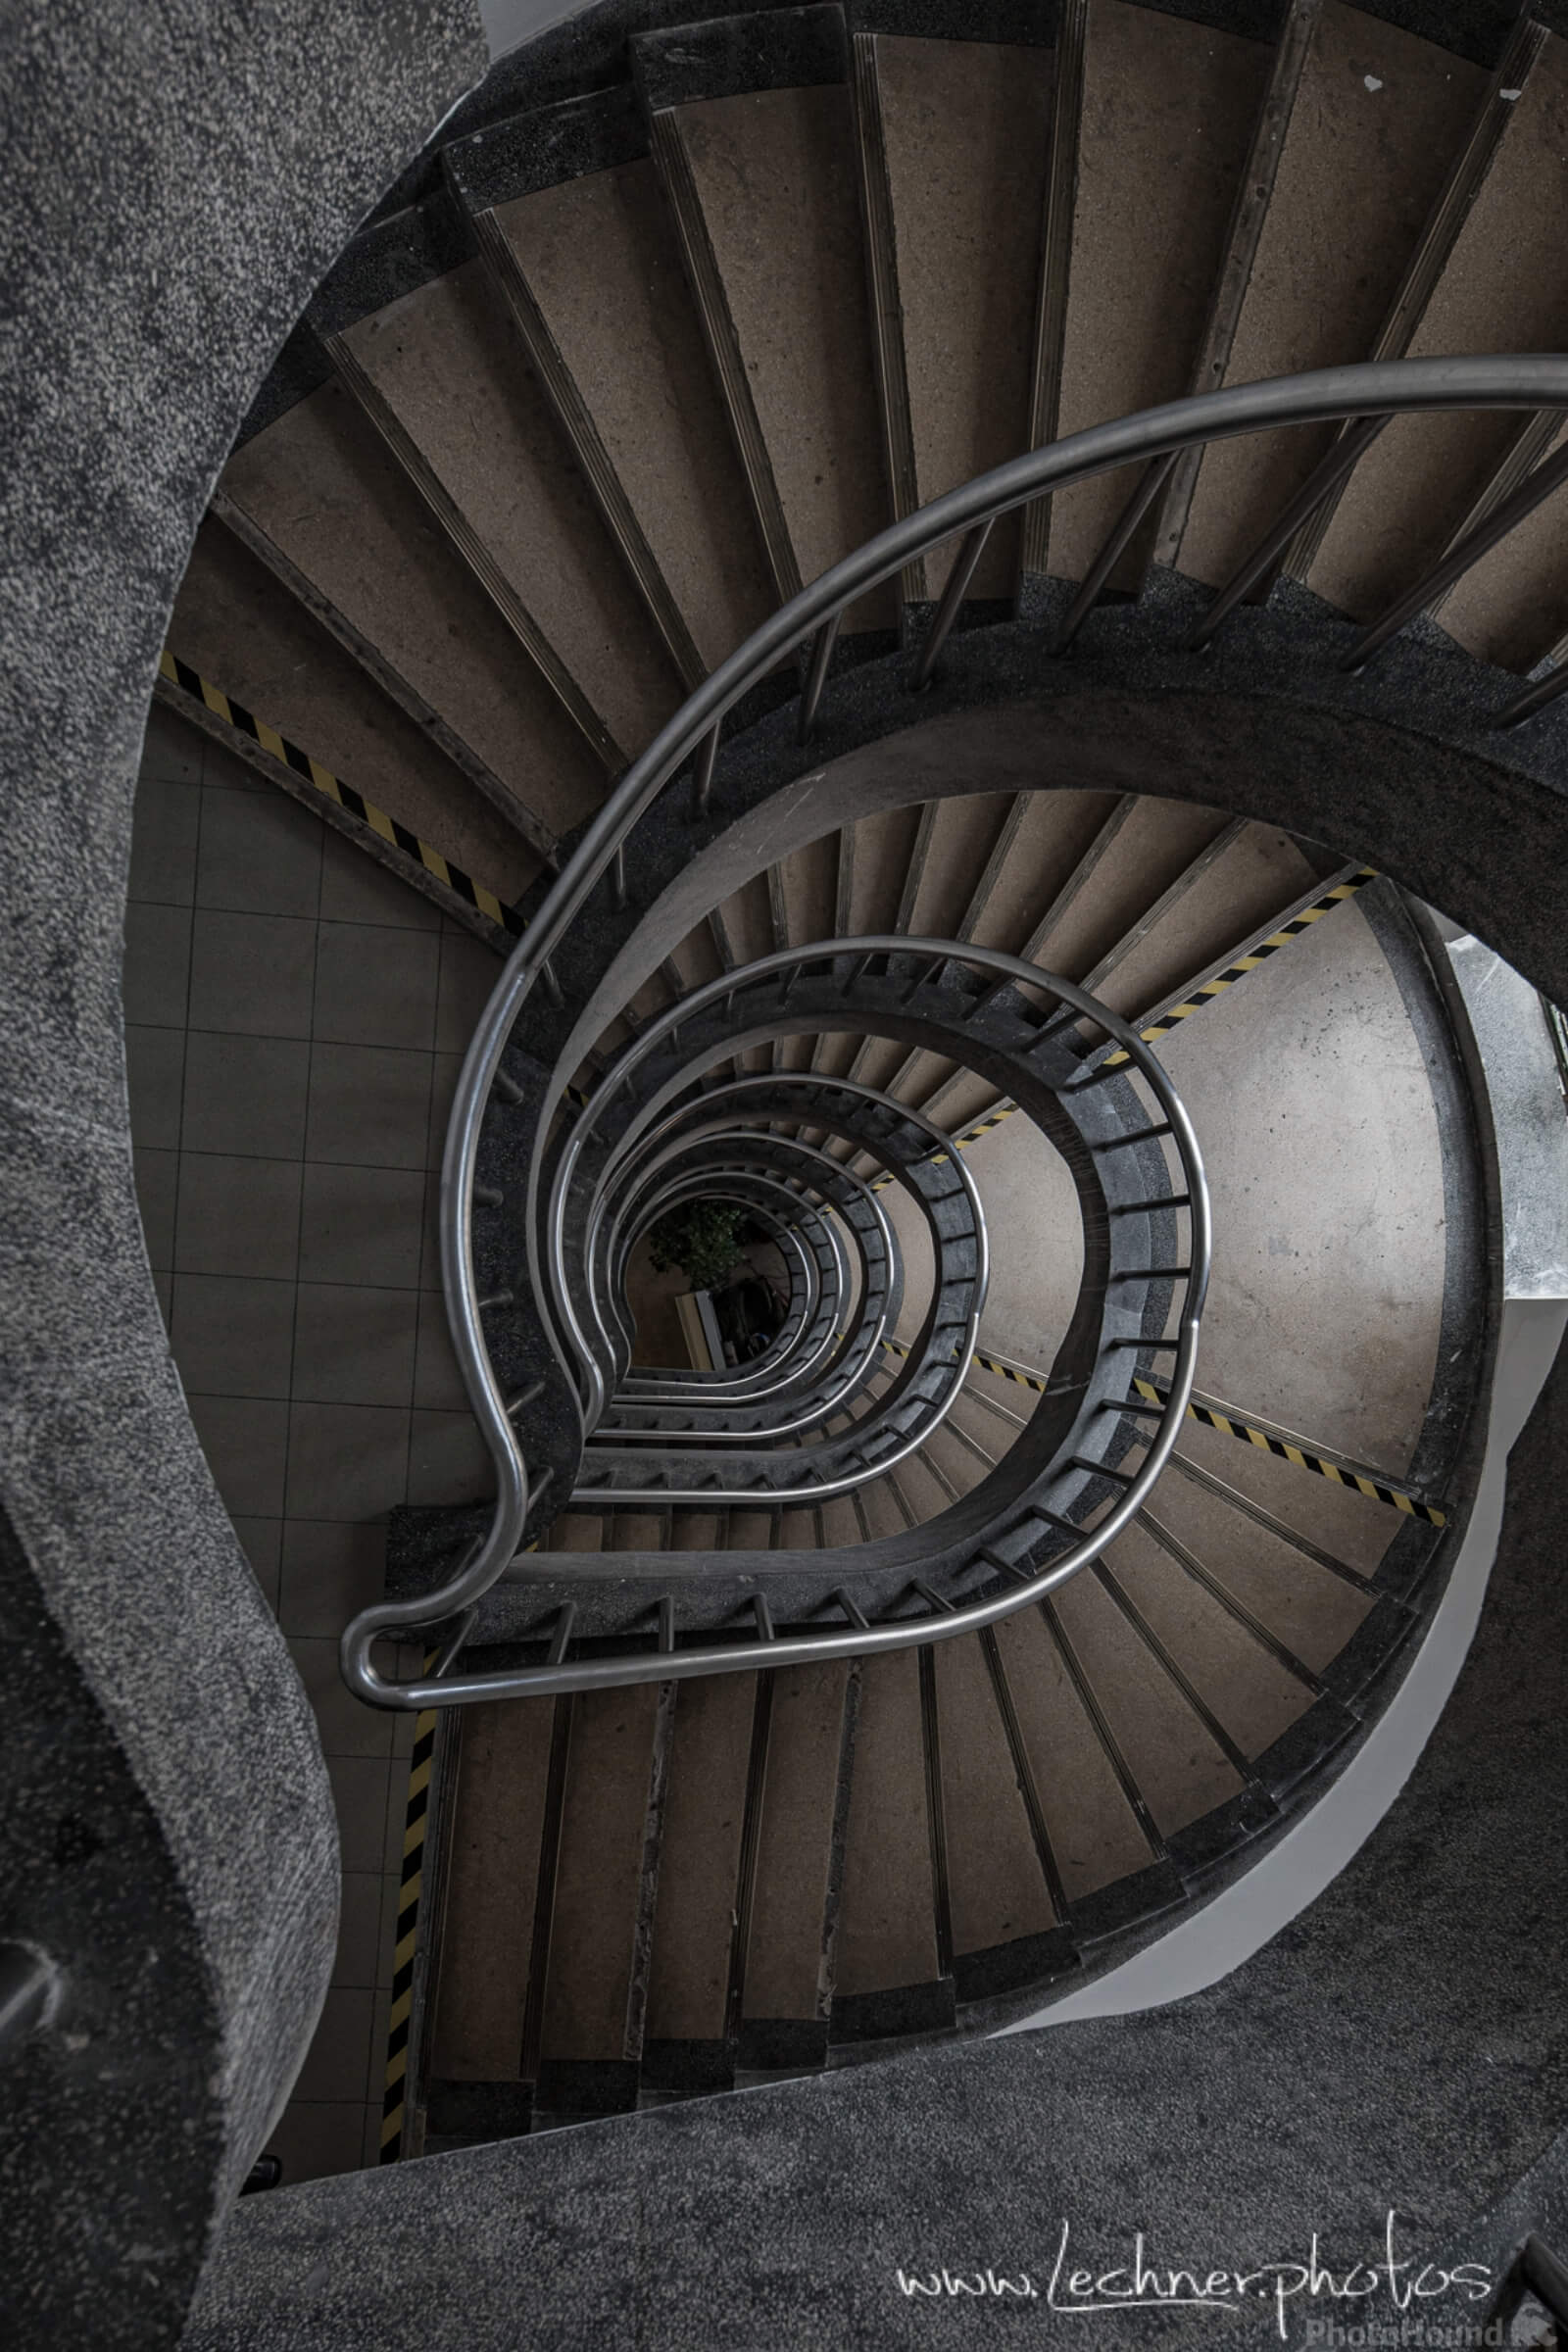 Image of Spiral Staircase at Laoximen Cultural Center by Florian Lechner